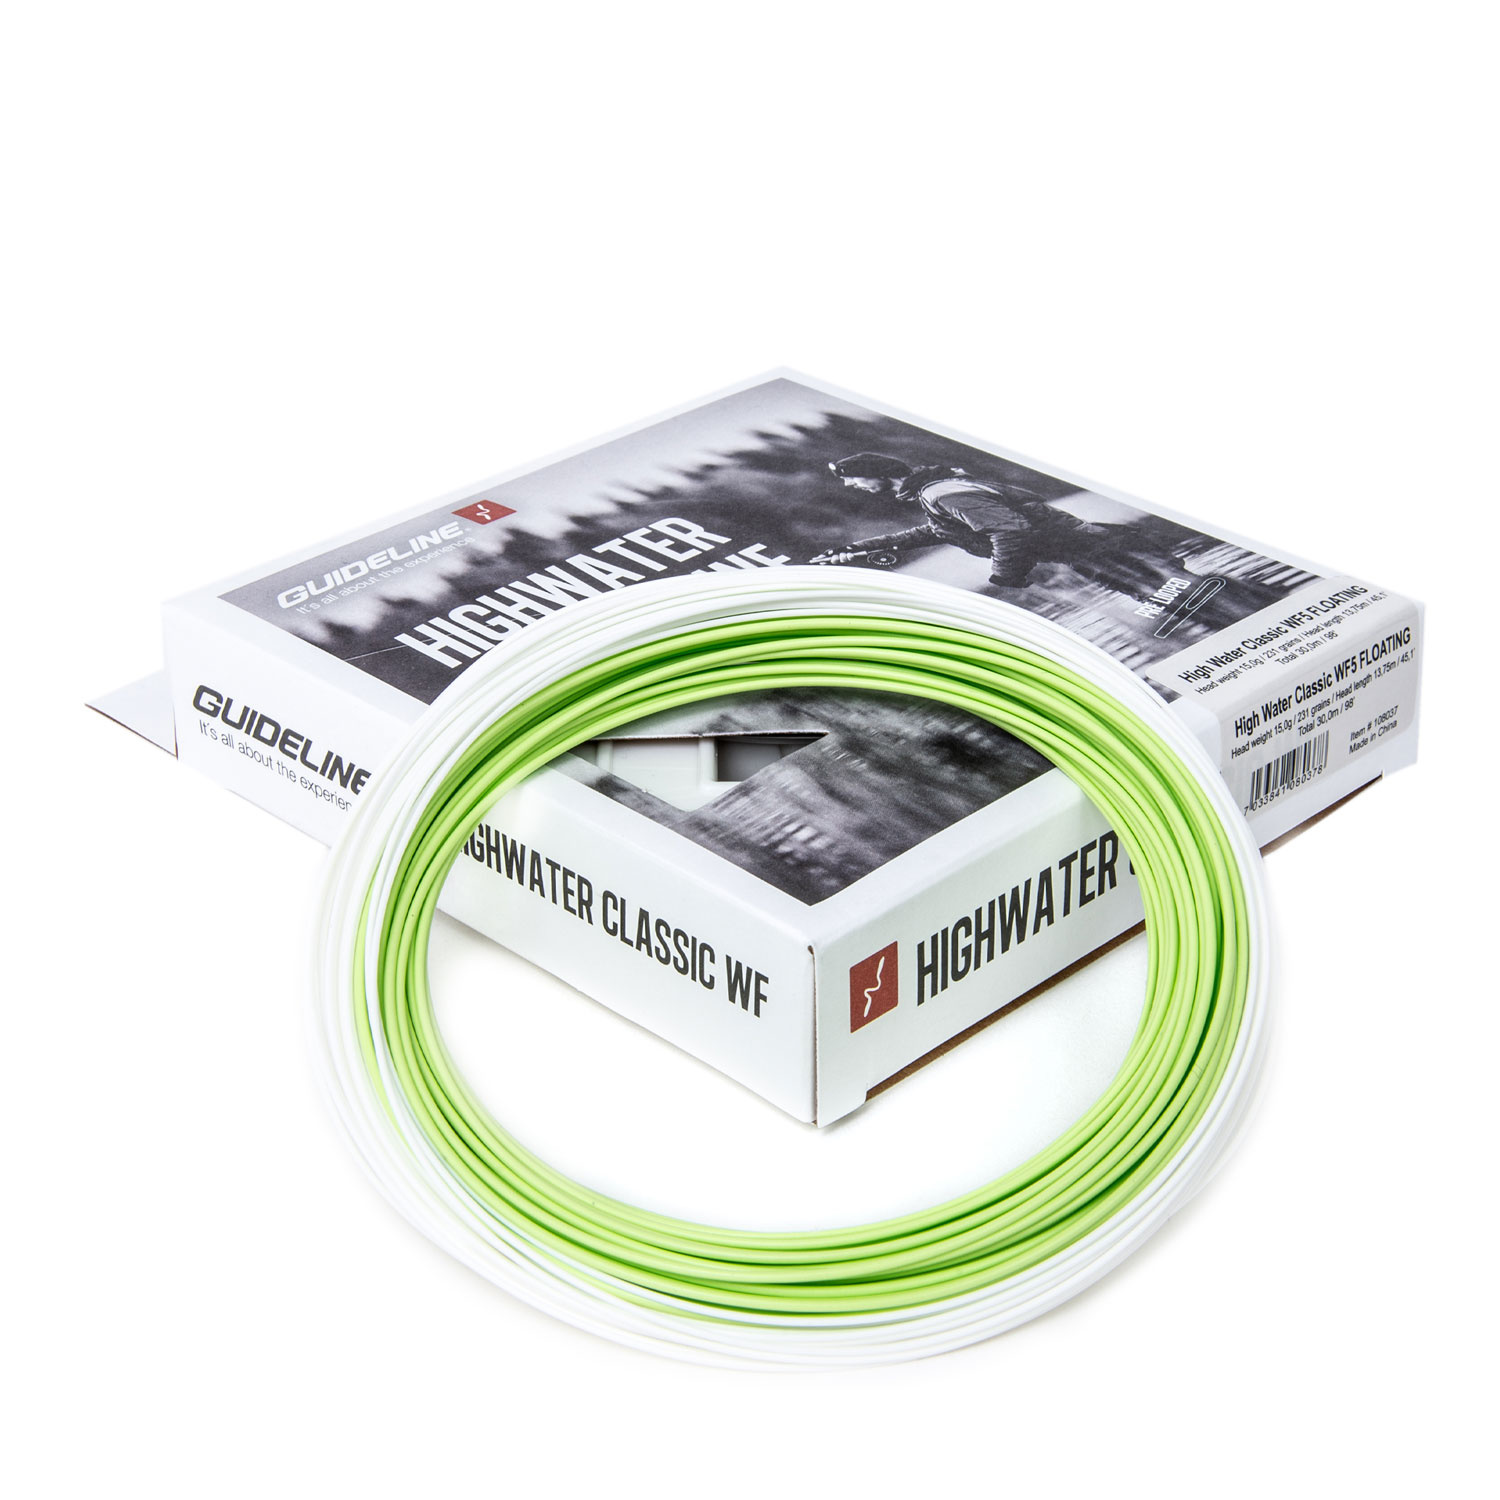 Guideline High Water Classic WF Fly Line Floating